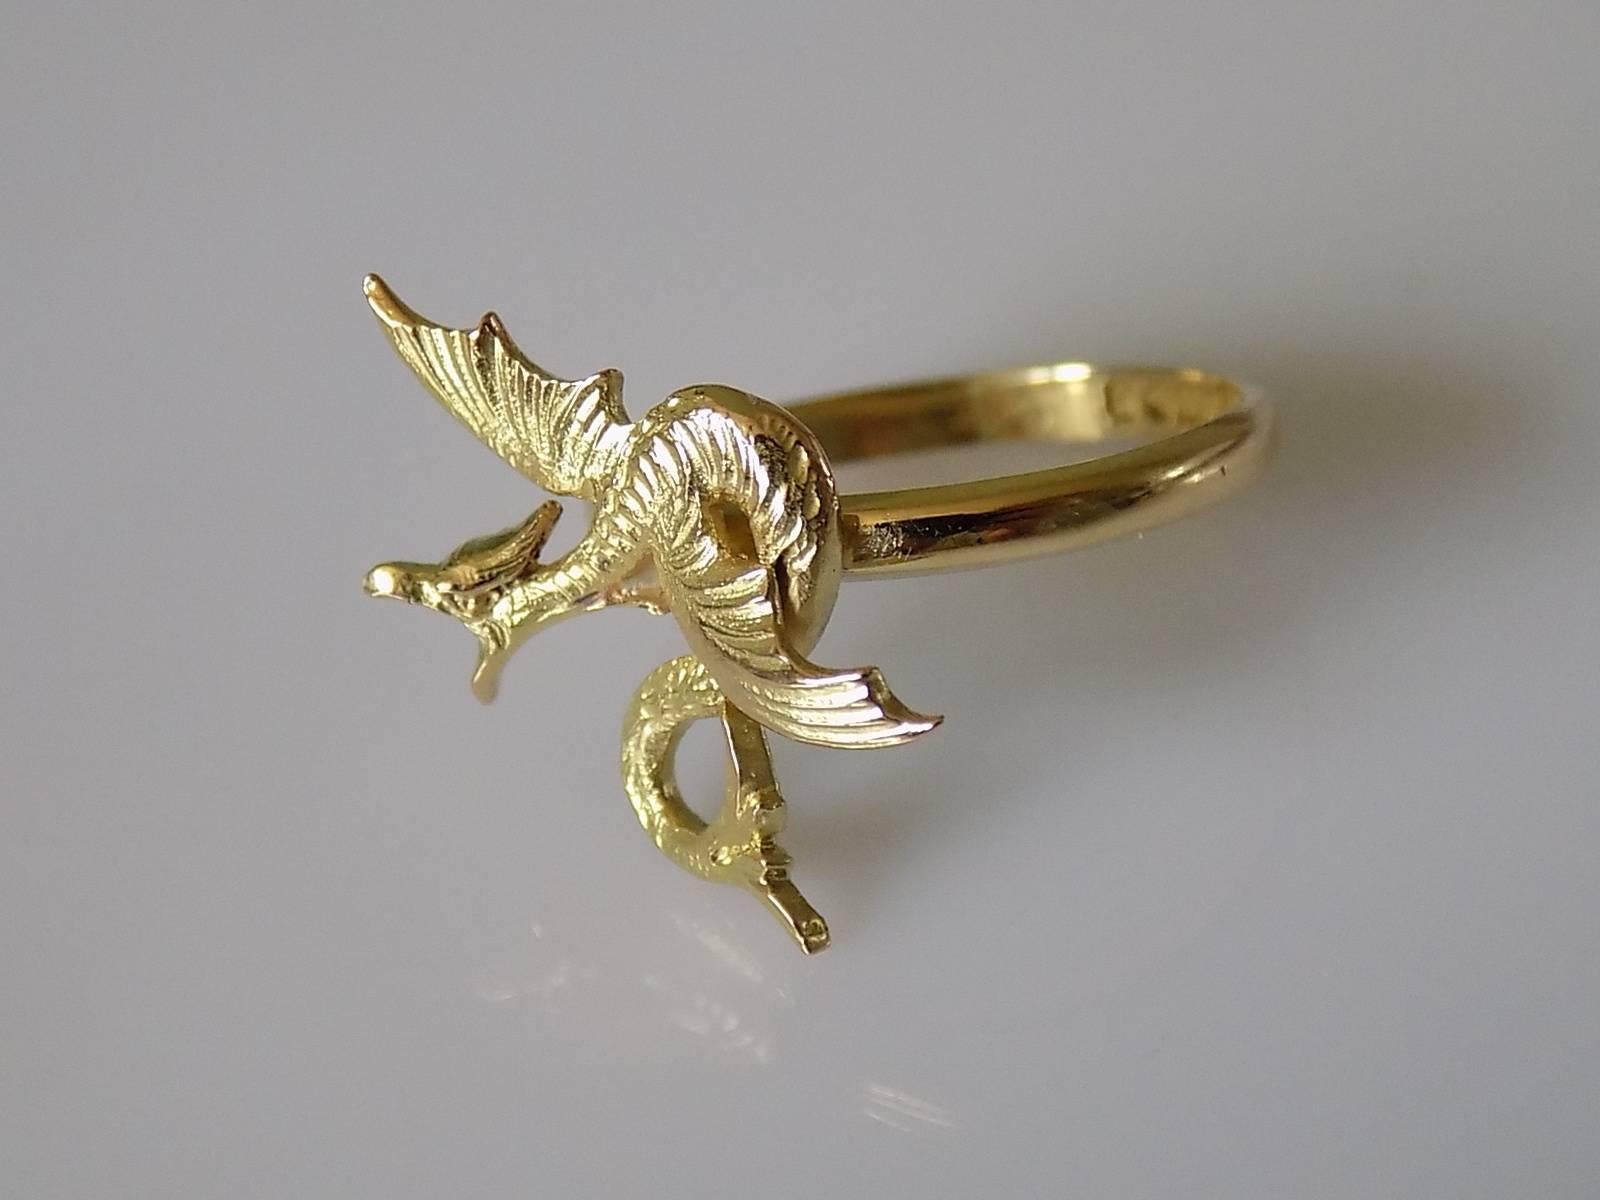 An Antique 18 Carat Gold Flying Dragon ring. Ring made of Antique c.1900 18 Carat Gold Dragon stick pin with added 18 Carat Gold shank. Rare and Unique ring.

Size N UK, 7 US sizable.

Height 22mm.

Weight 3.3gr.

Shank fully hallmarked for